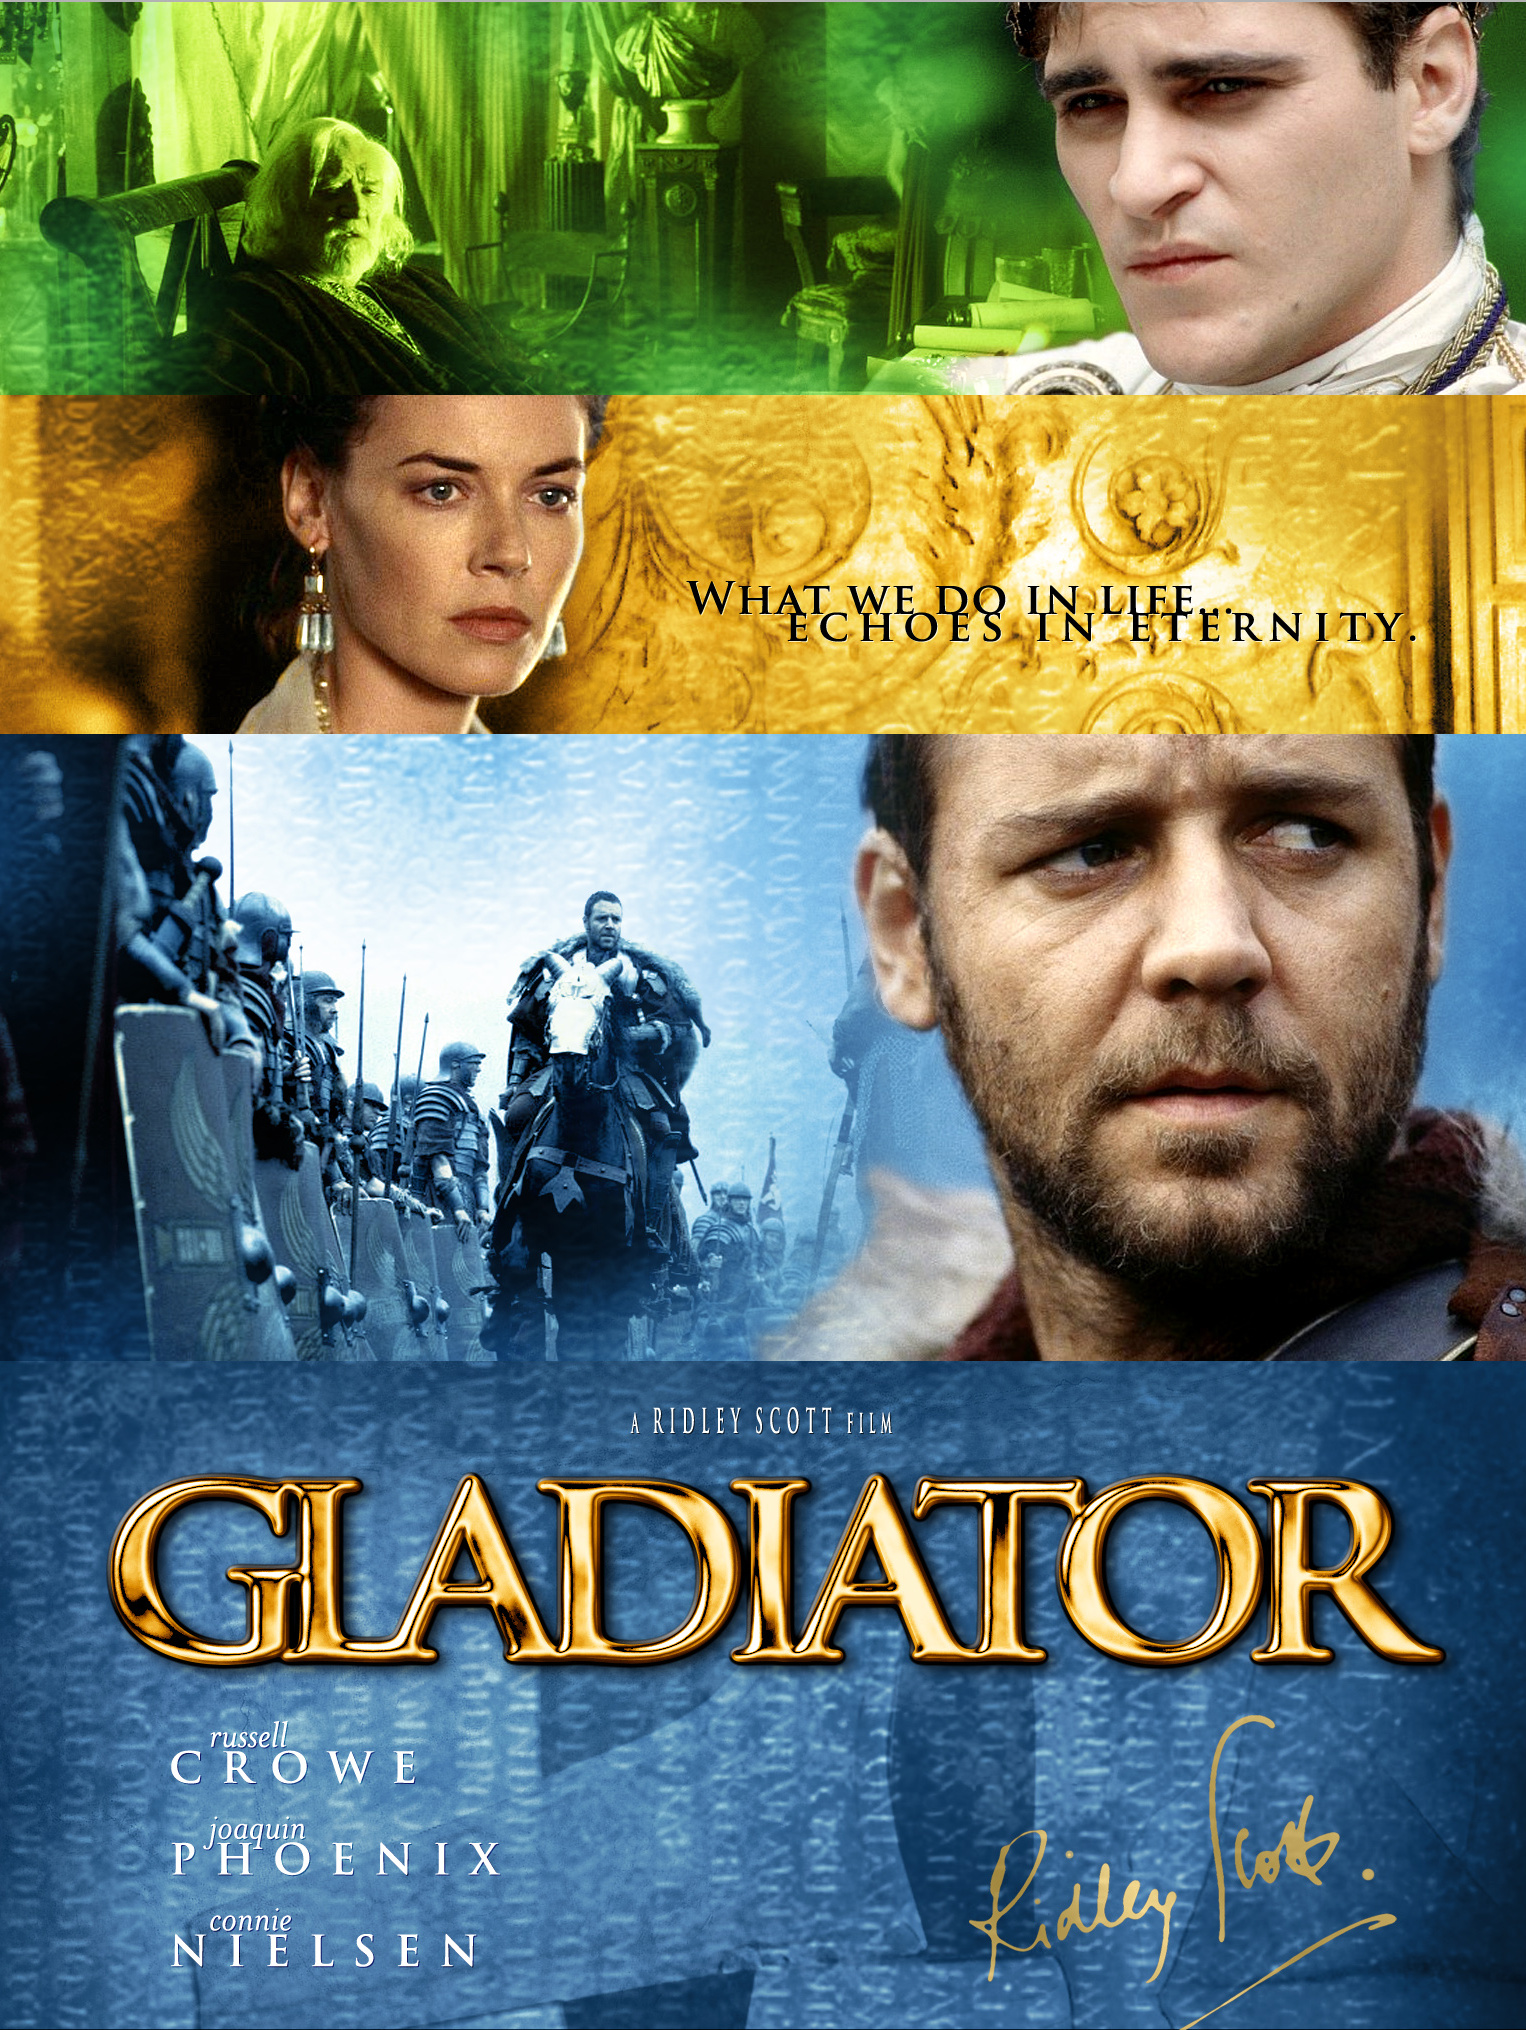 Gladiador (2000) 1080p OPEN MATTE [Theatrical + Extended]